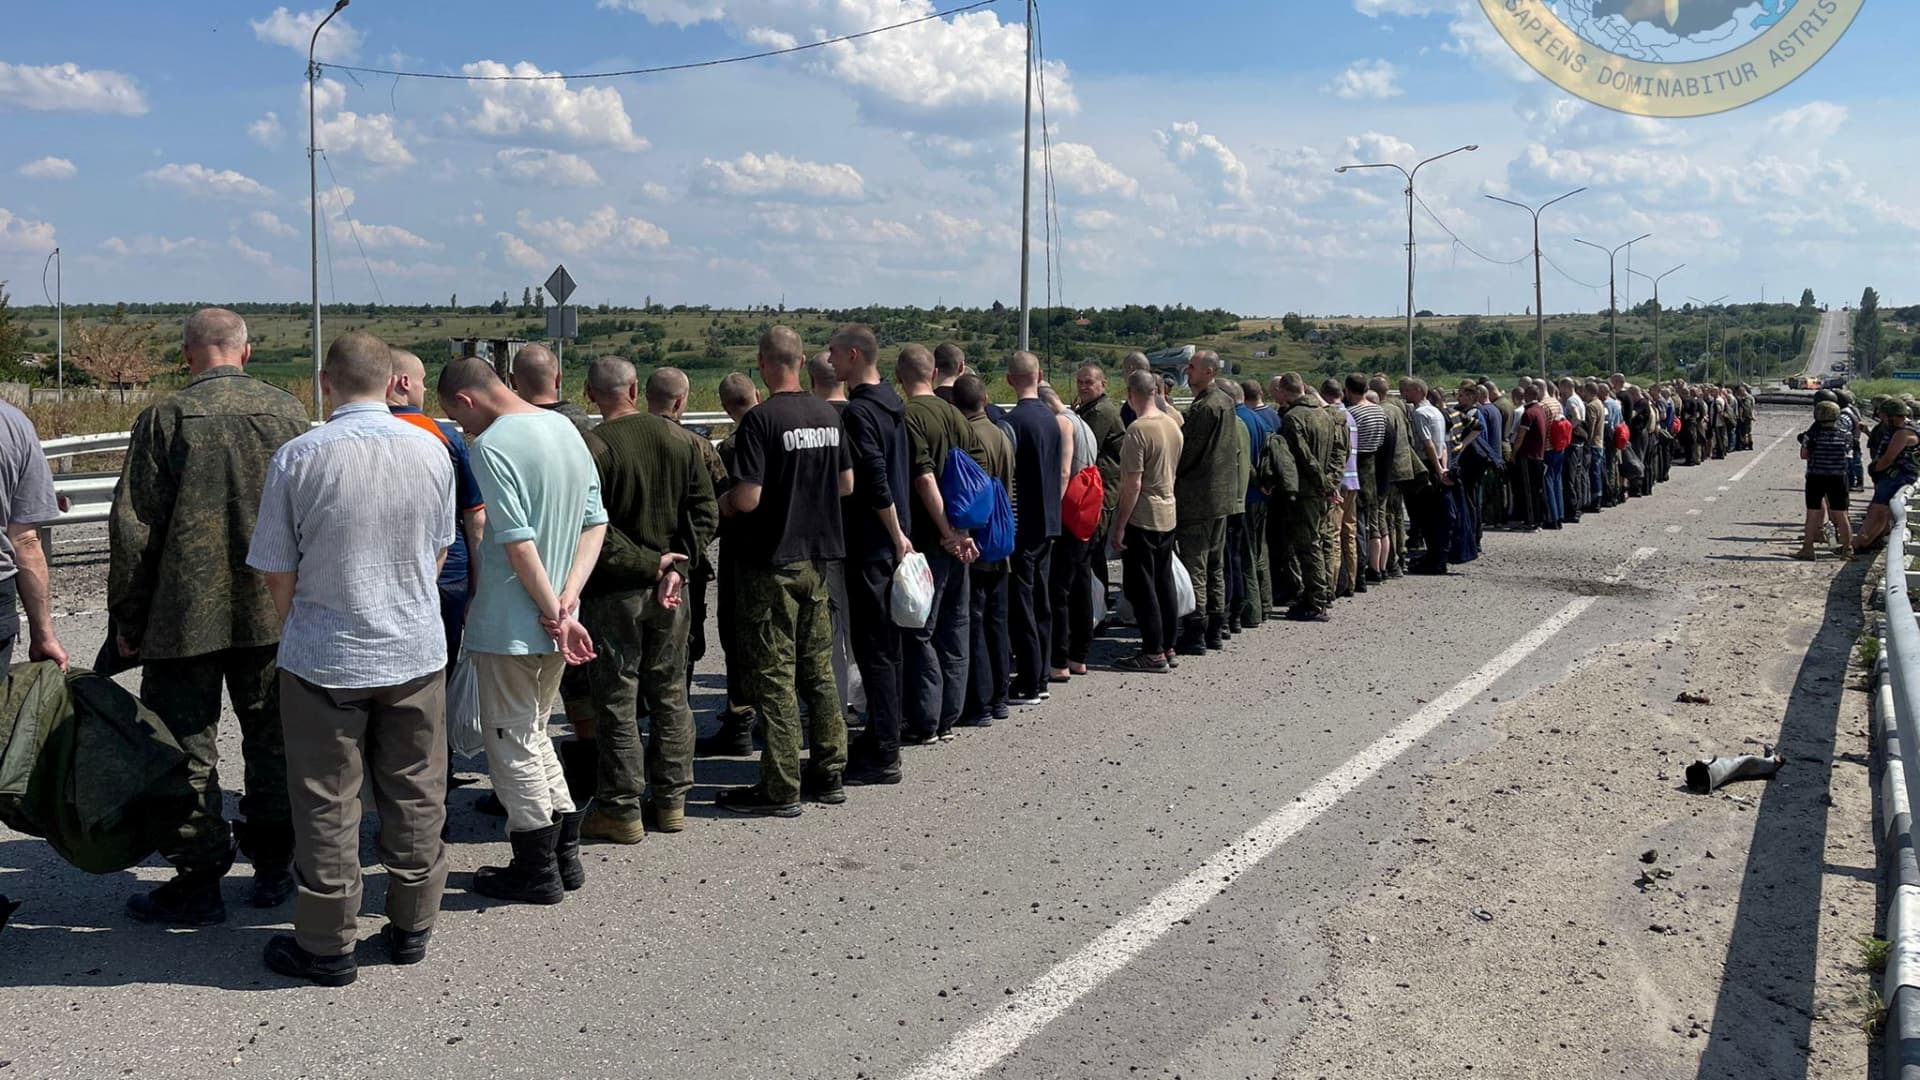 Prisoners line up alongside a road during a prisoner exchange, as Russia's attack on Ukraine continues, at a location given as Zaporizhzhia region, Ukraine, in this handout photo released on June 29, 2022. 